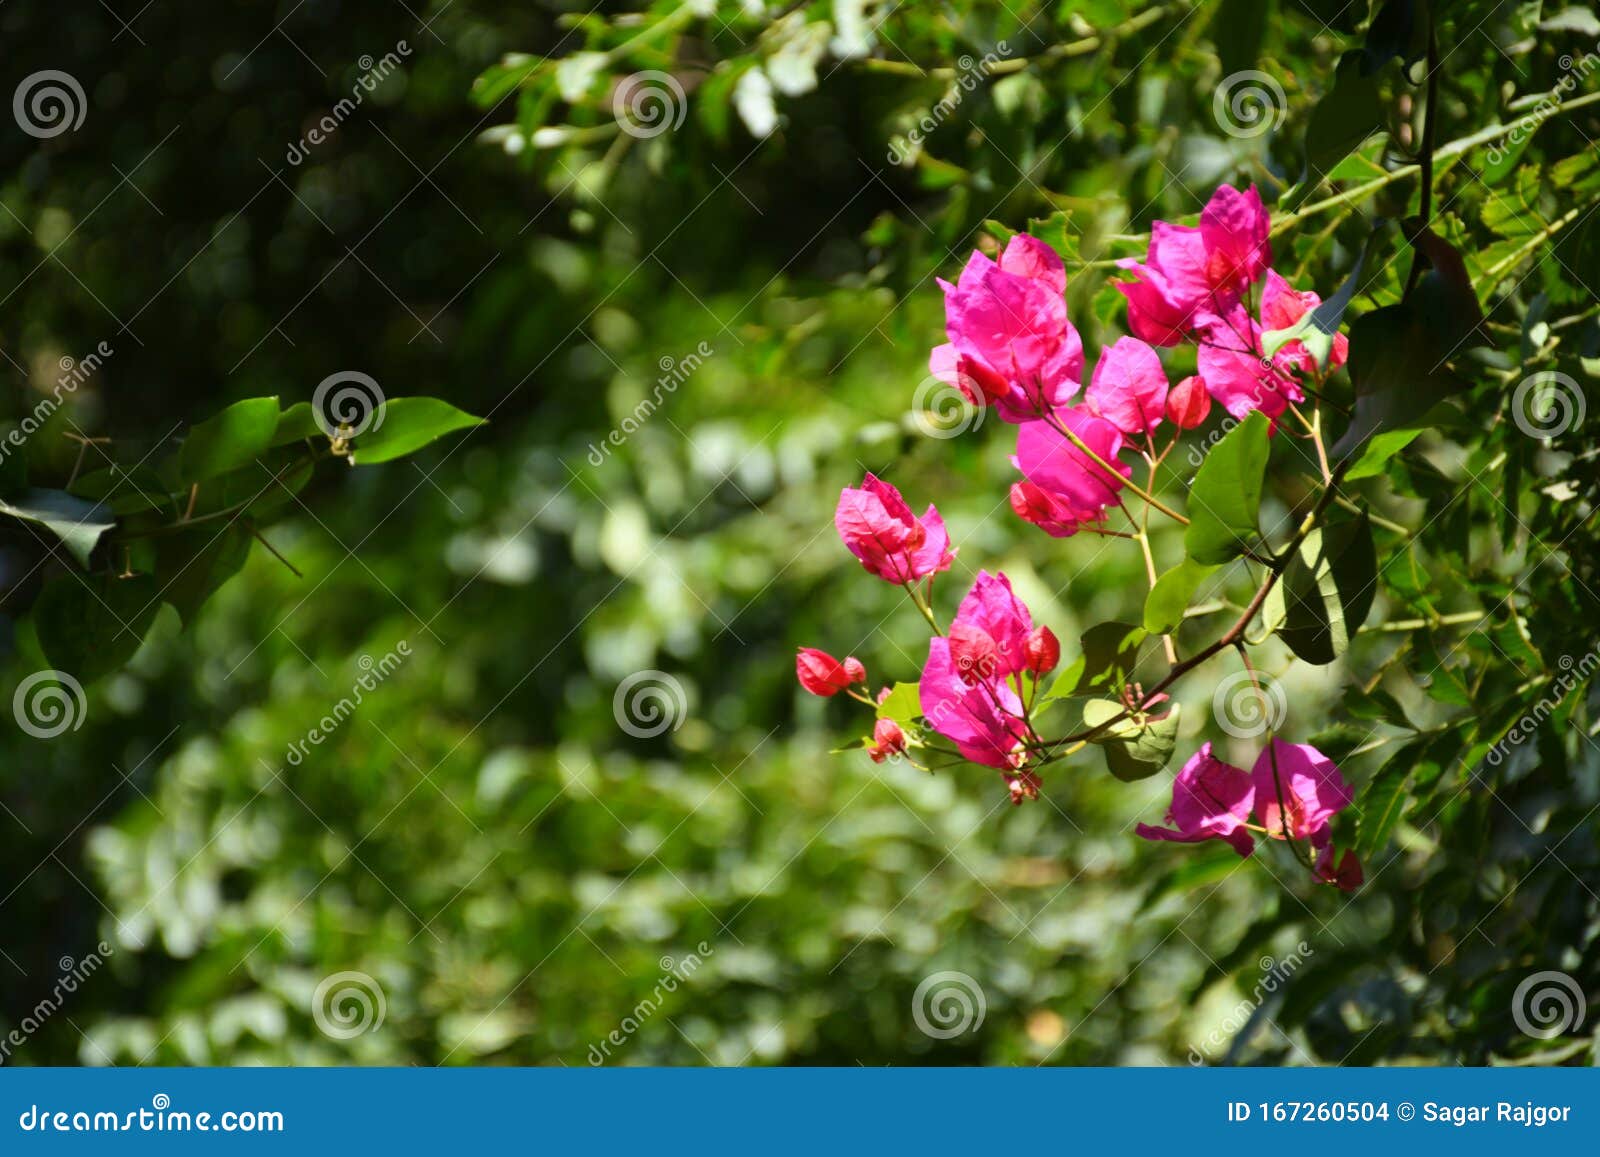 Pink Flowers Greenery Background Green Leafs Stock Photo - Image of ...